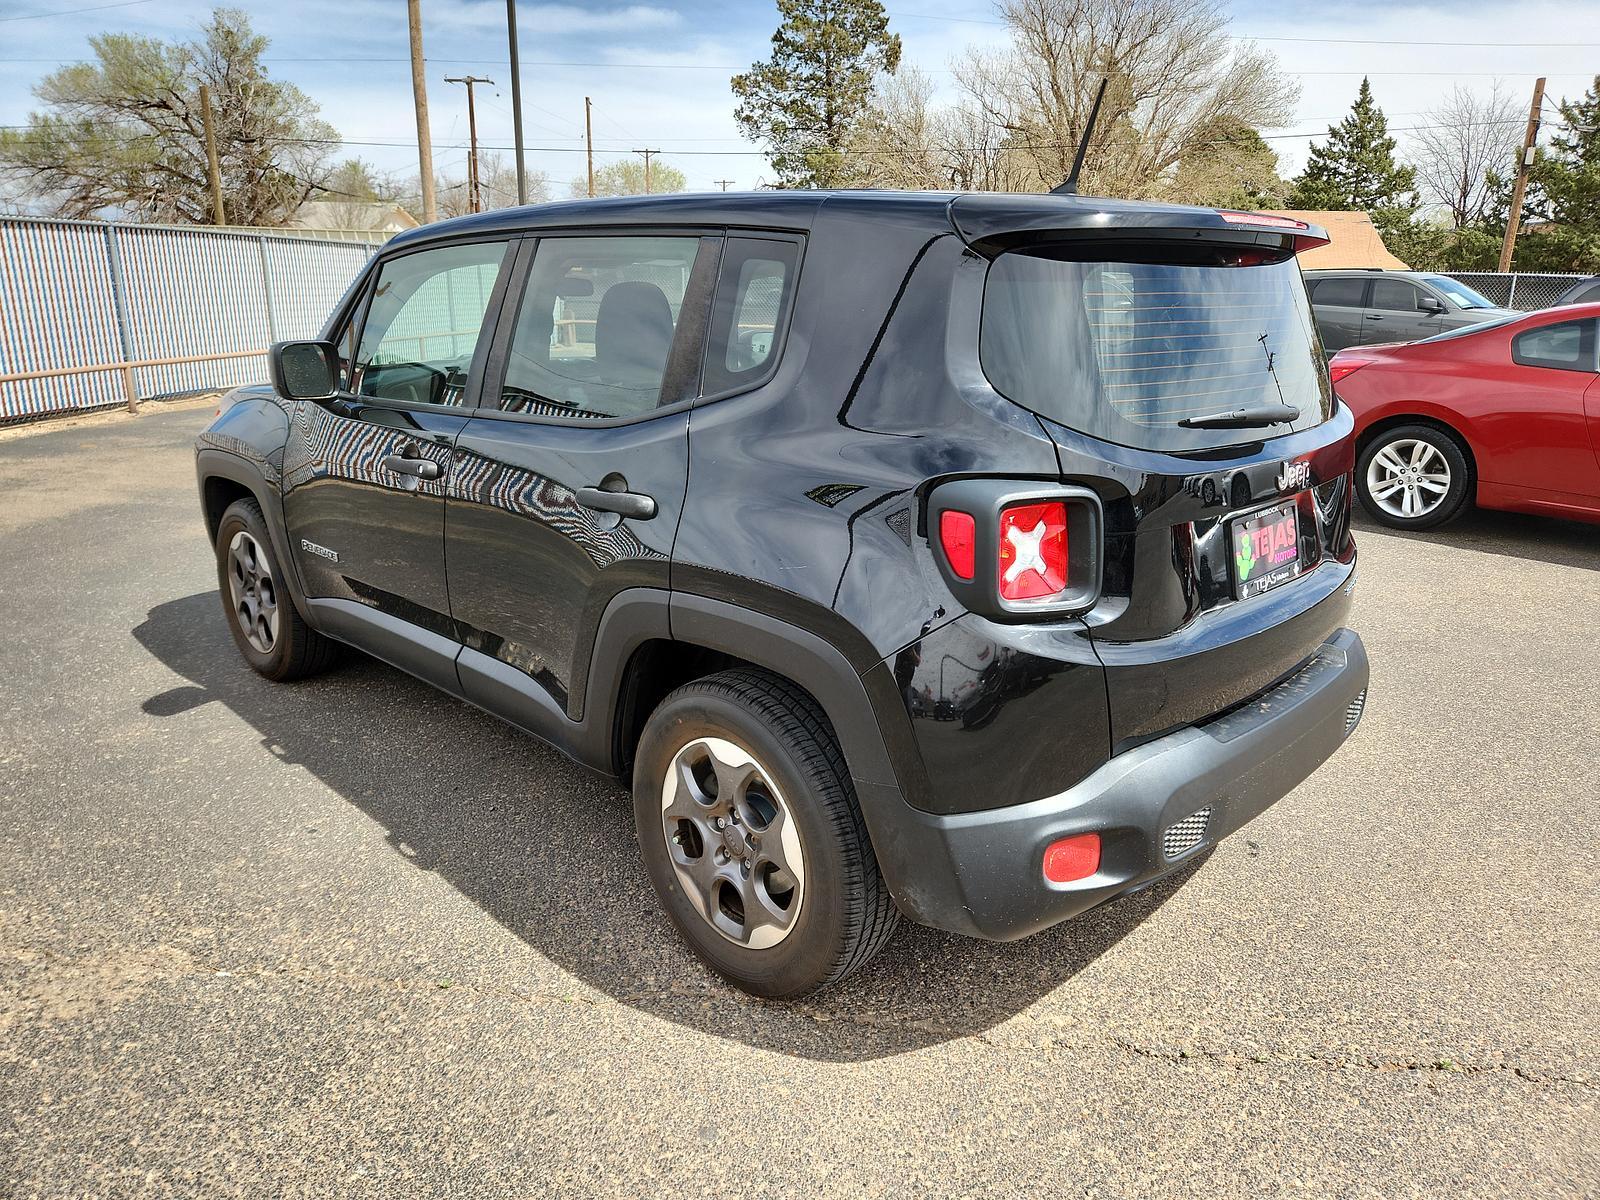 2015 BLACK JEEP RENEGADE SPORT (ZACCJAAT0FP) , located at 4110 Avenue Q, Lubbock, 79412, 33.556553, -101.855820 - Photo #2